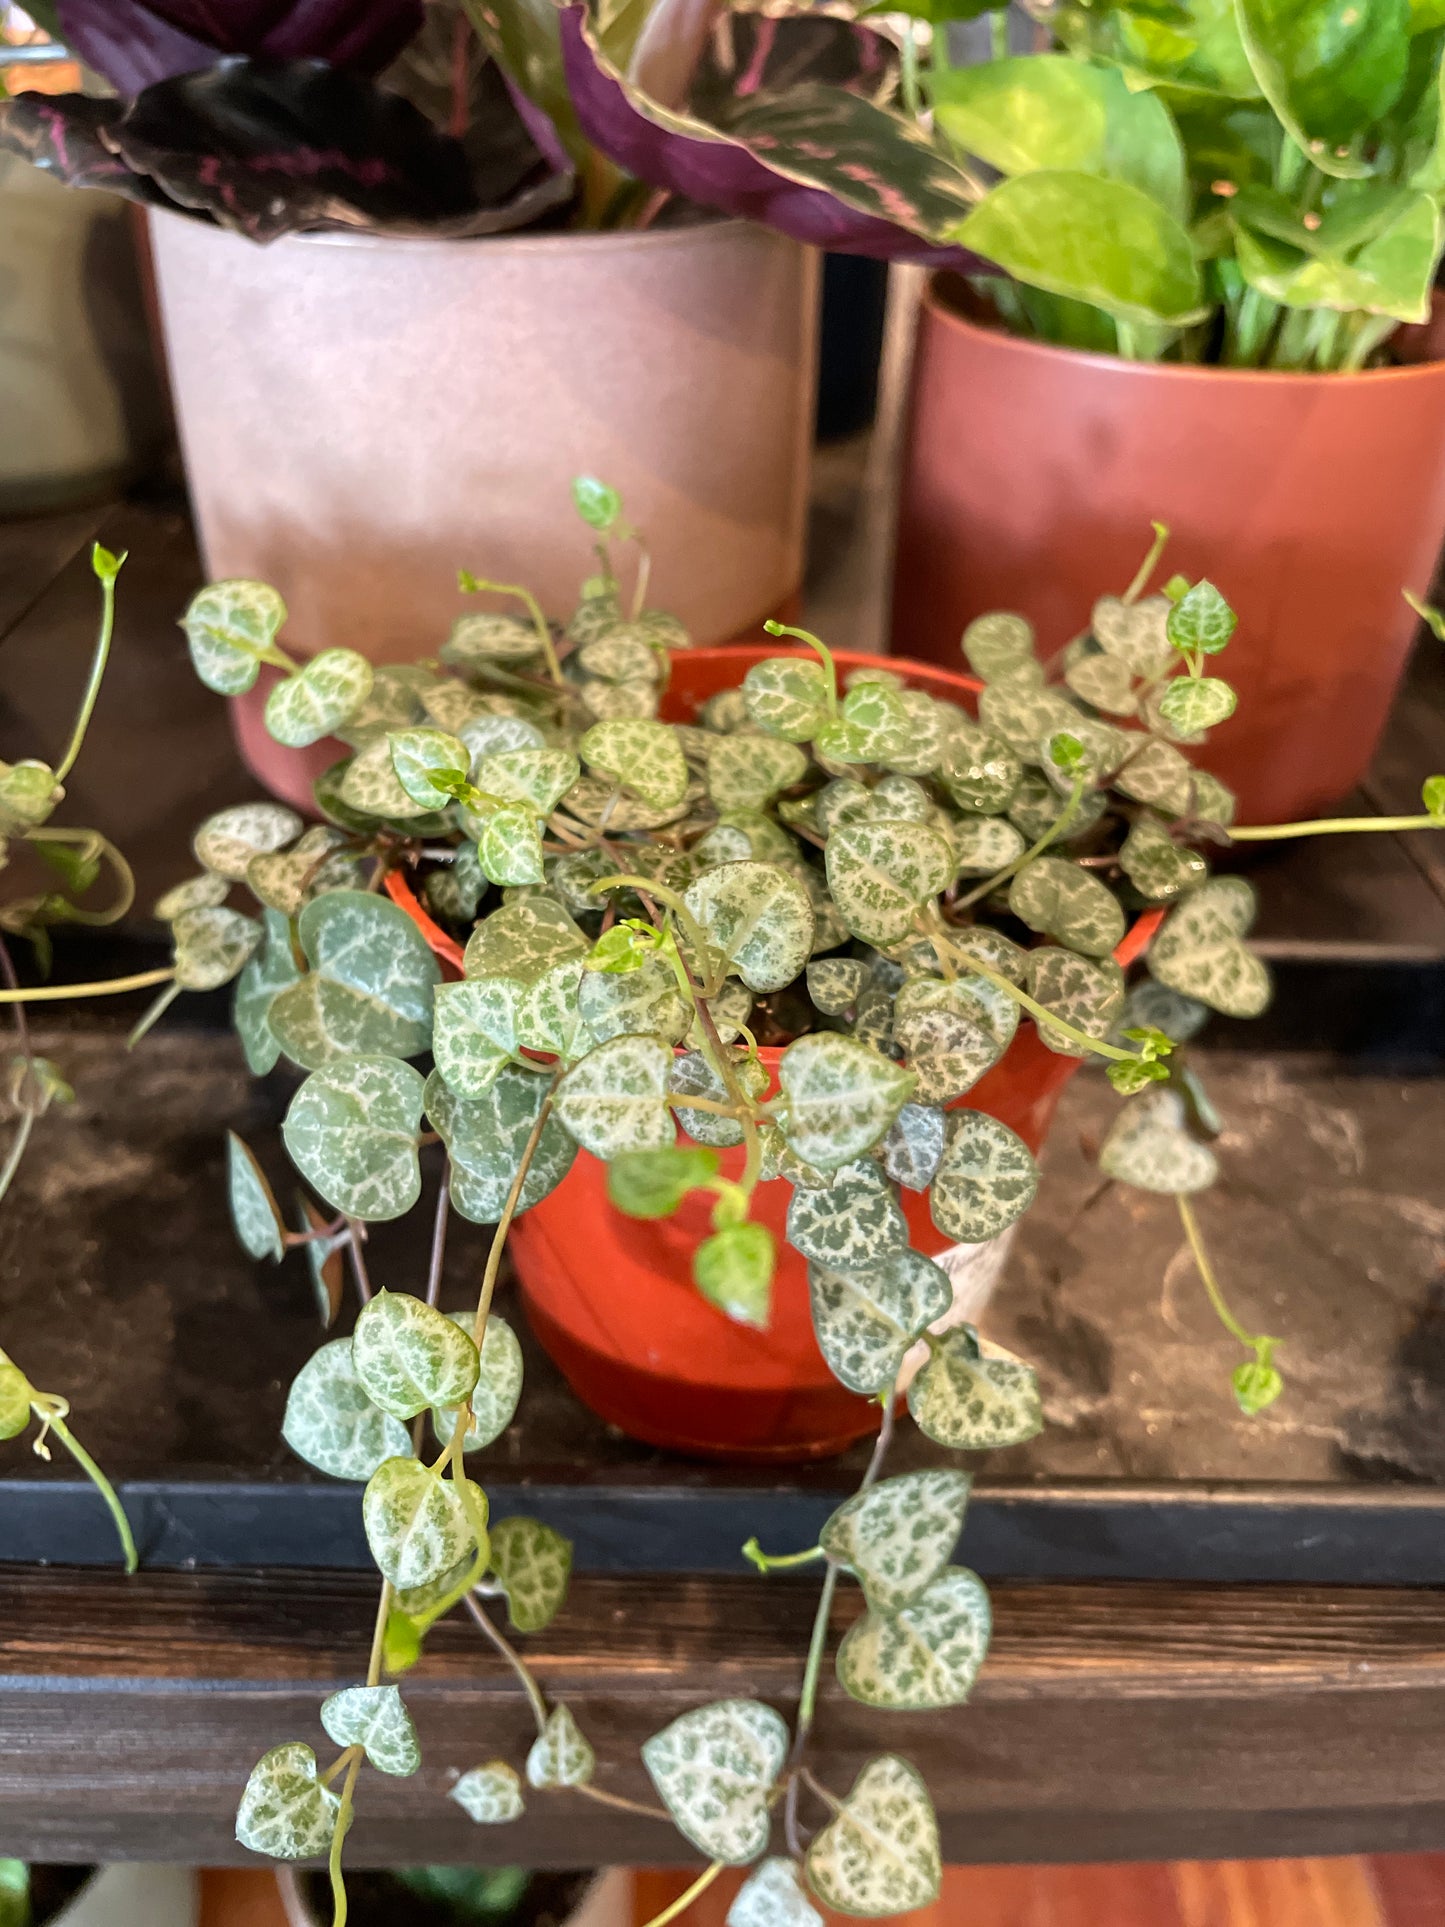 Ceropegia Woodii (String of Hearts)